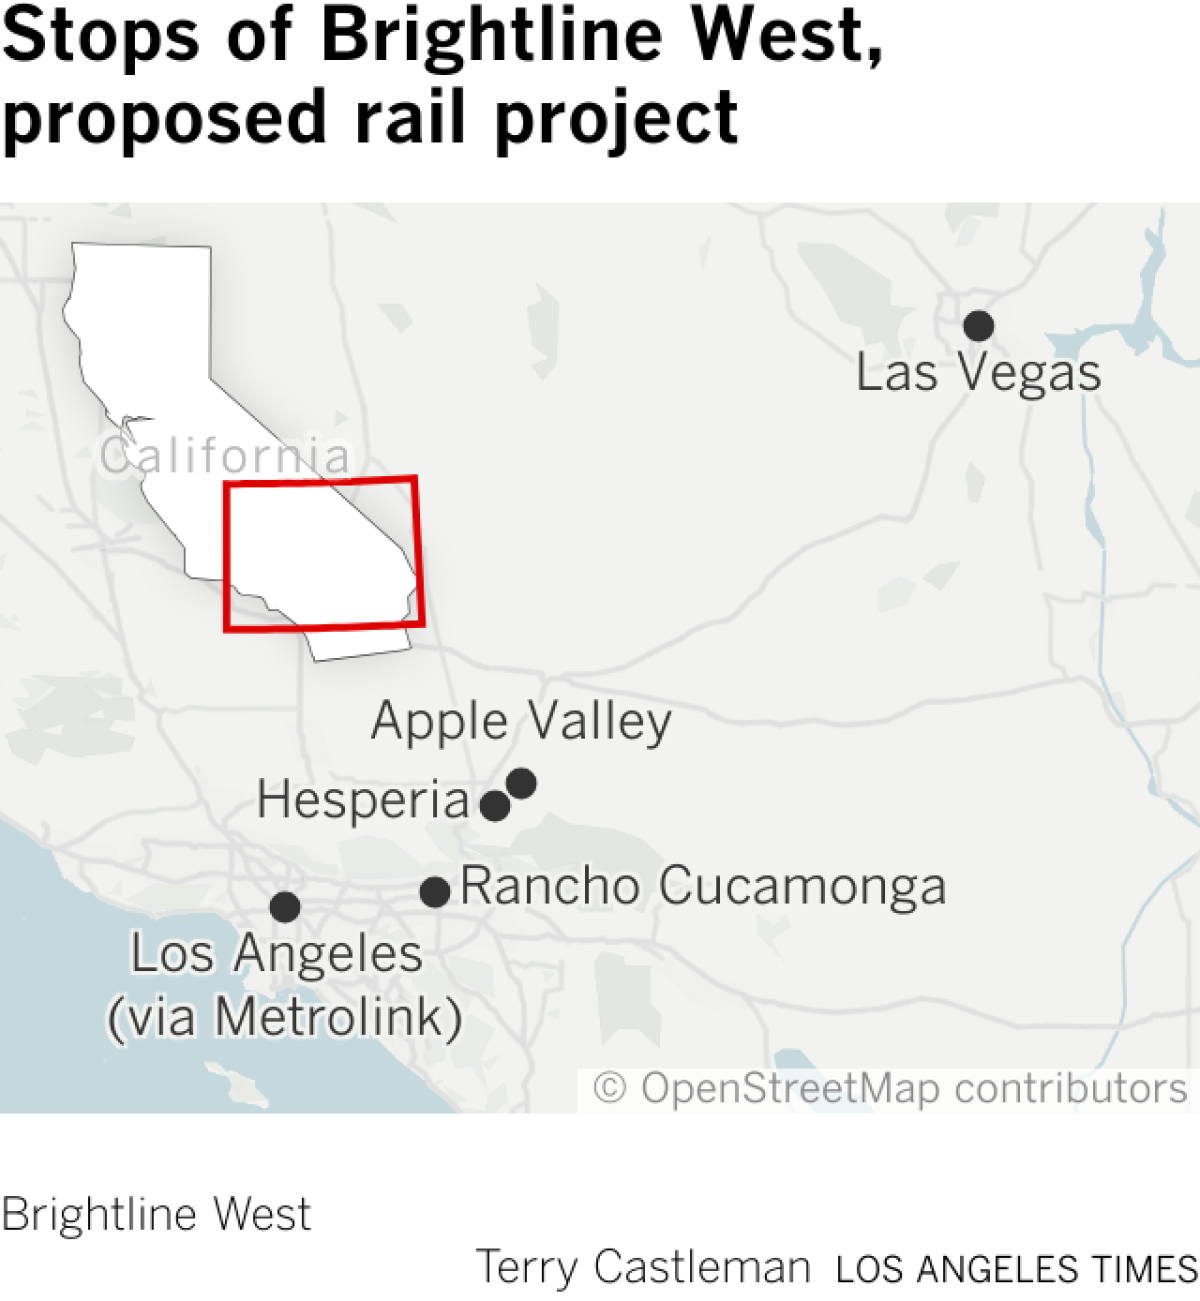 Map showing cities to be connected by proposed high speed rail project in Southern California and Nevada.